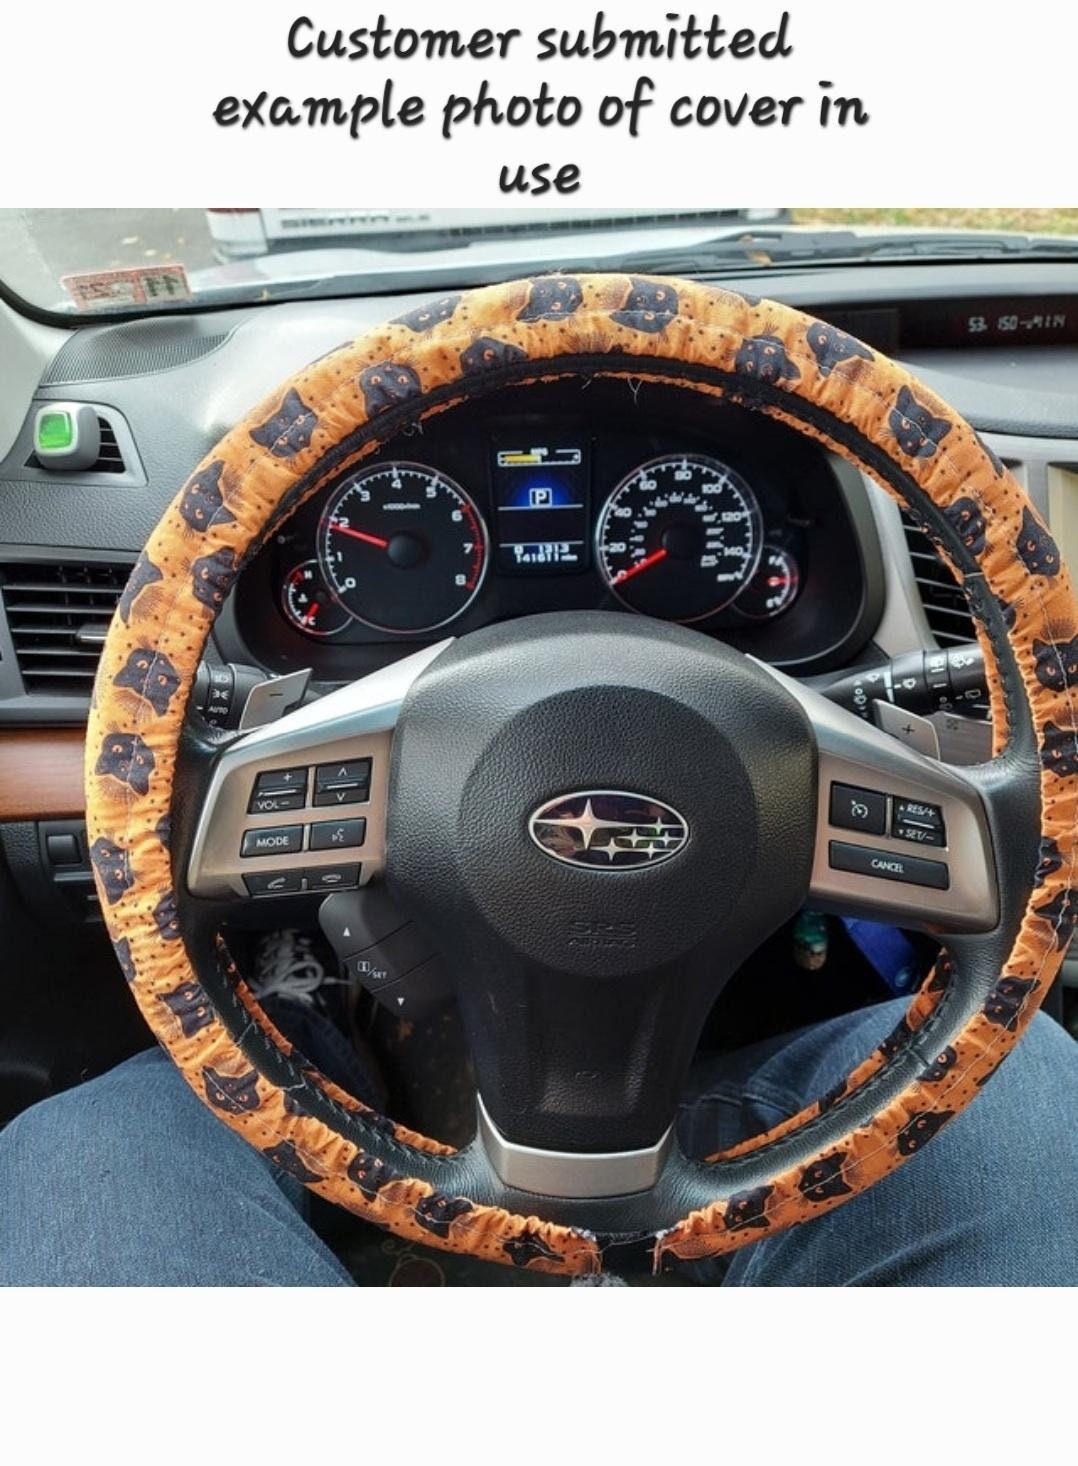 Jack-O-Lantern Steering Wheel Cover - Harlow's Store and Garden Gifts